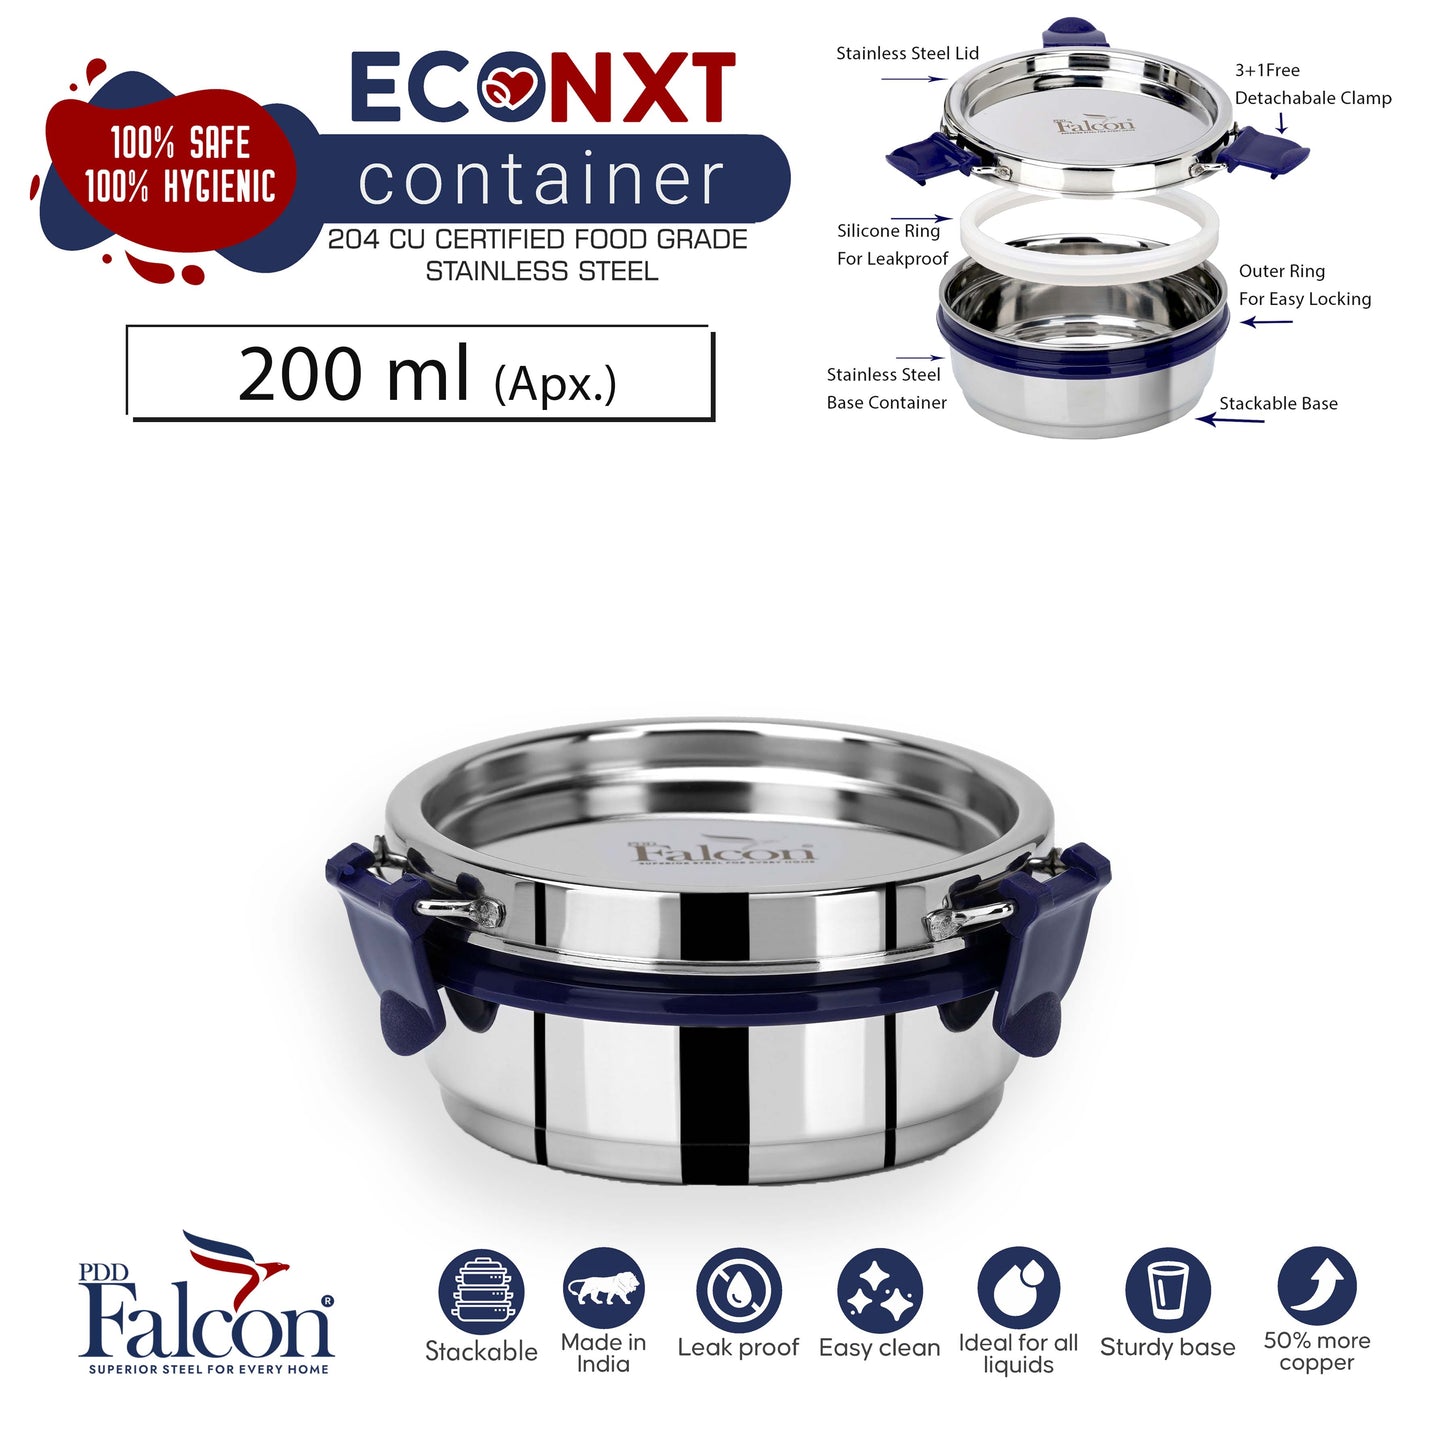 PddFalcon_Stainless_Steel_Lunch_Box_EcoNxt_Container_200ml